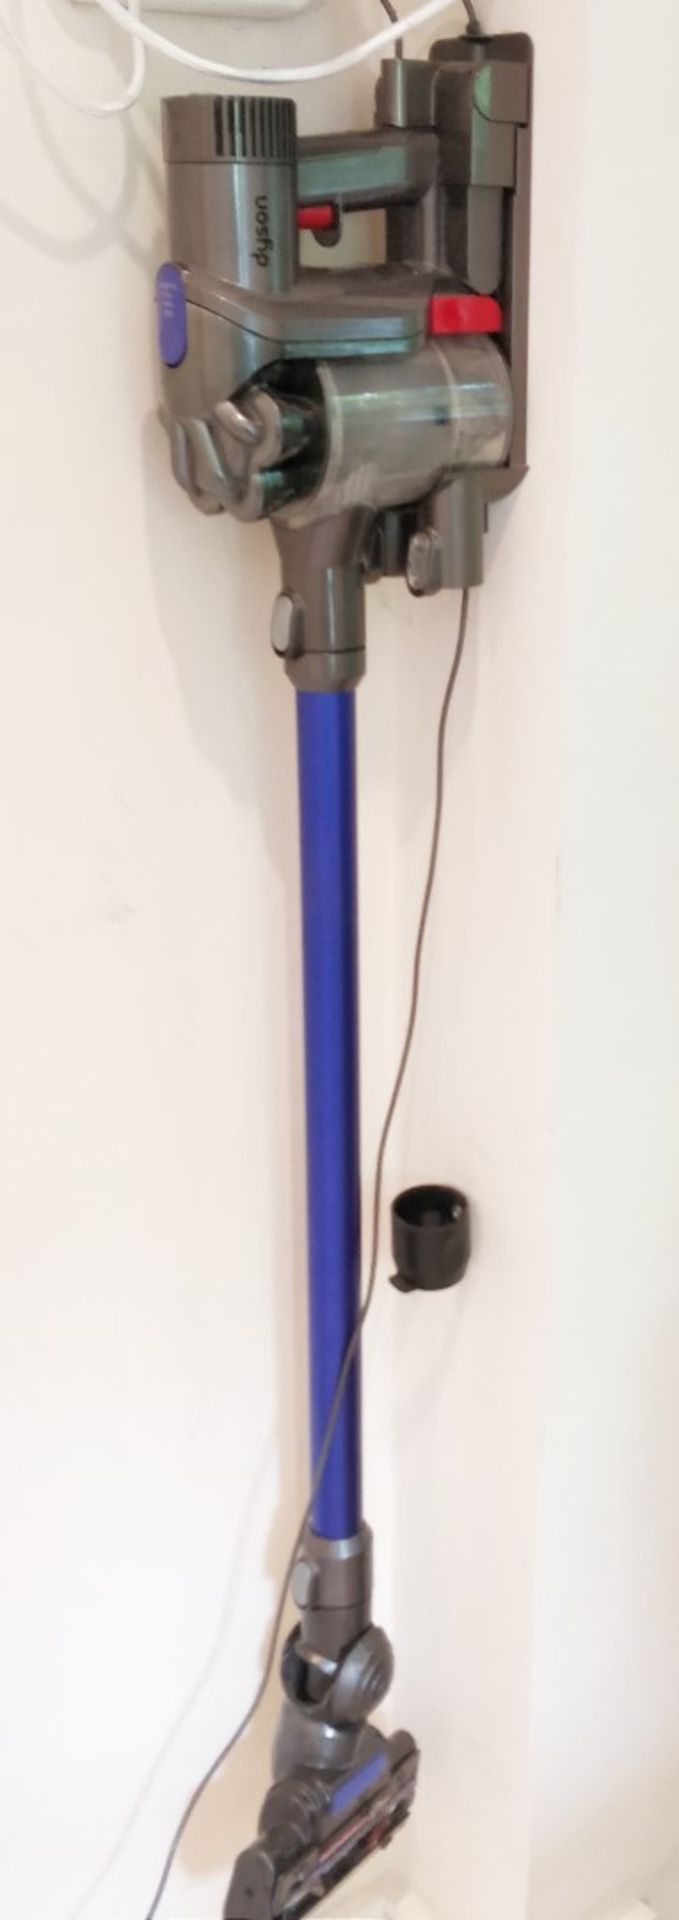 1 x Dyson DC44 Animal Cordless Vacuum Cleaner With Wall Mounted Charger - Ref WH2 - NO VAT ON THE